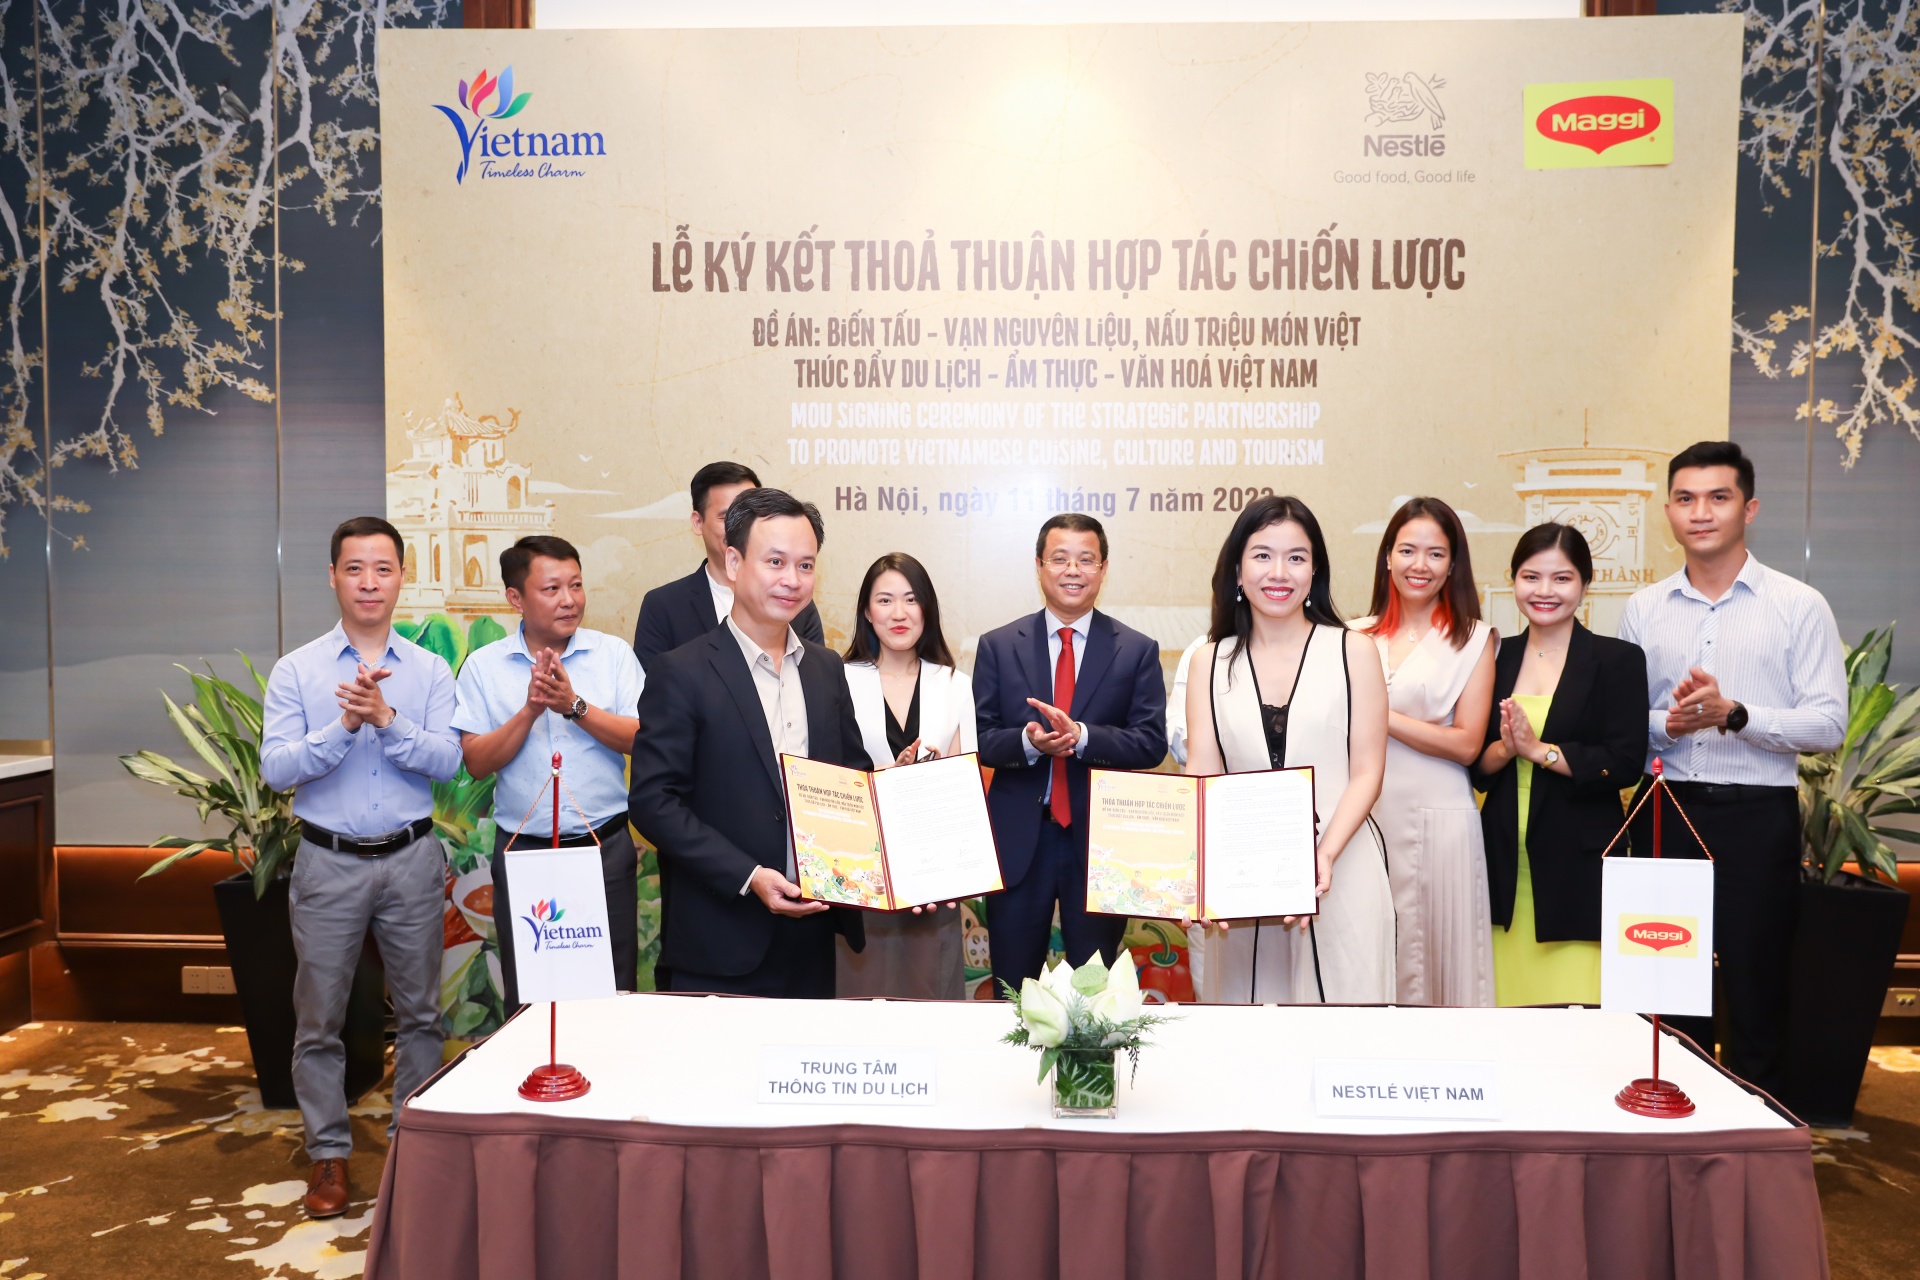 Nestlé aims to promote over 50,000 Vietnamese dishes